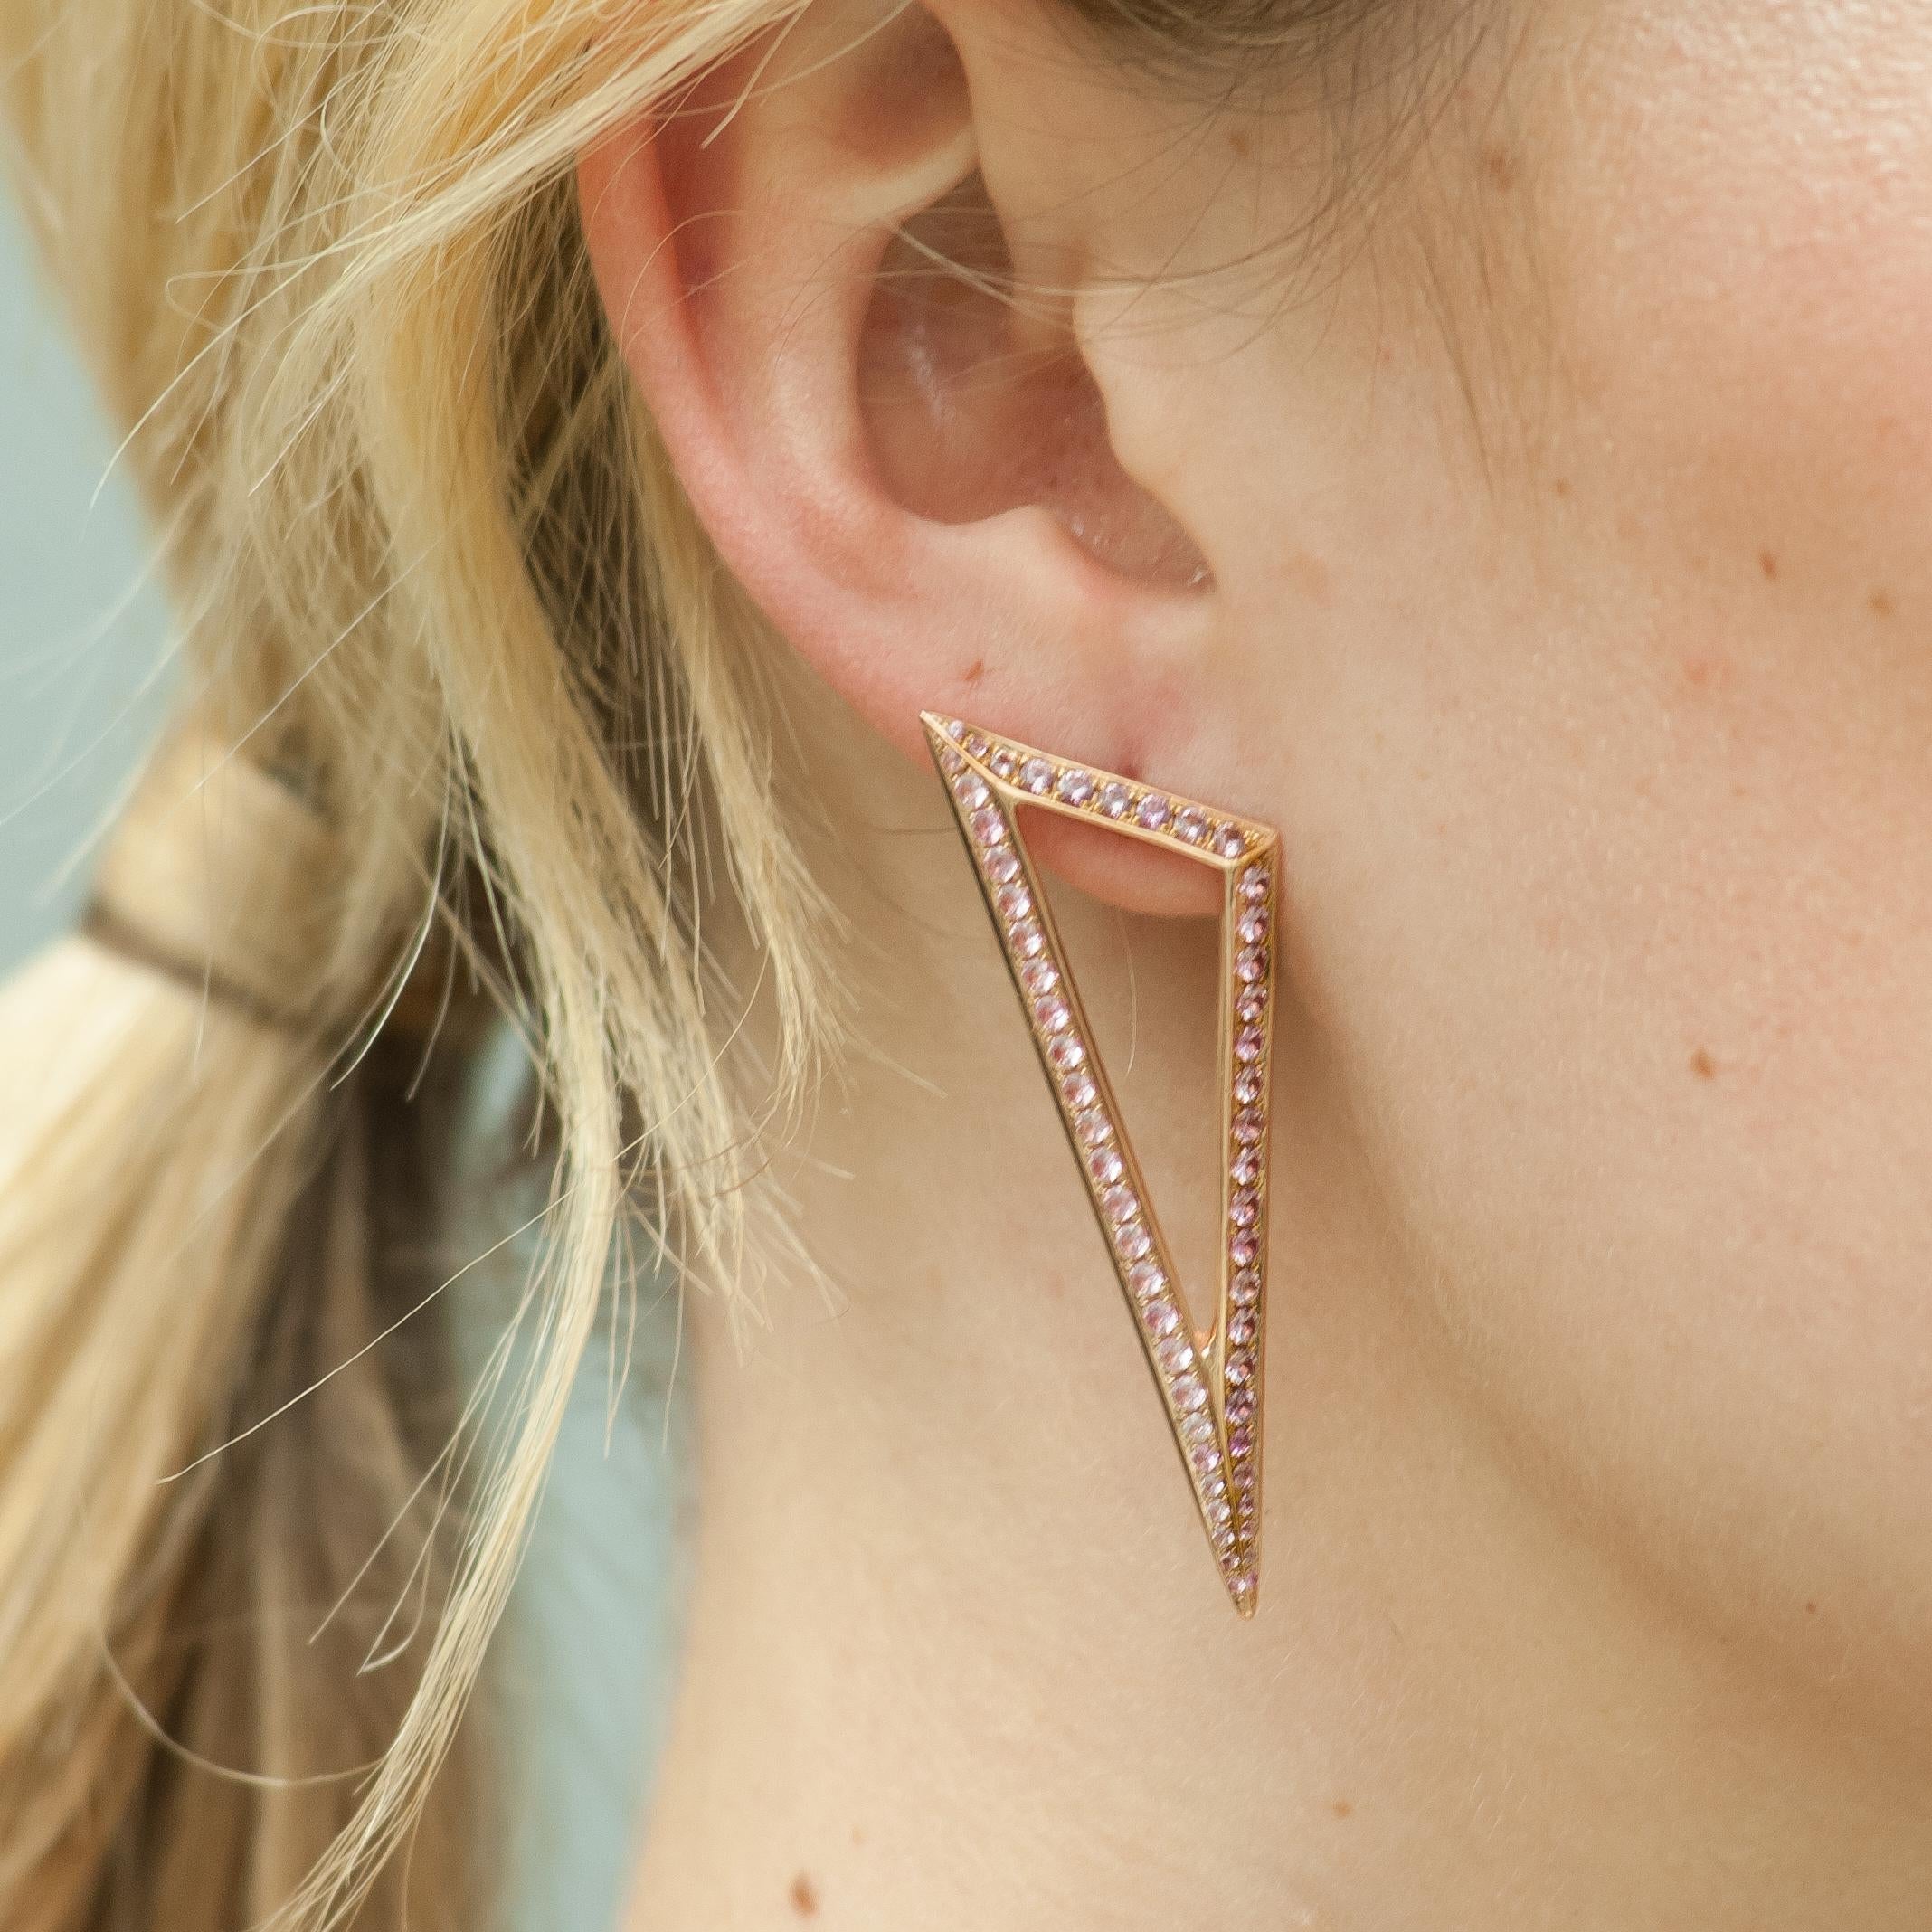 Ralph Masri Modernist Pink Sapphire Triangle Earrings In New Condition For Sale In Weston, MA